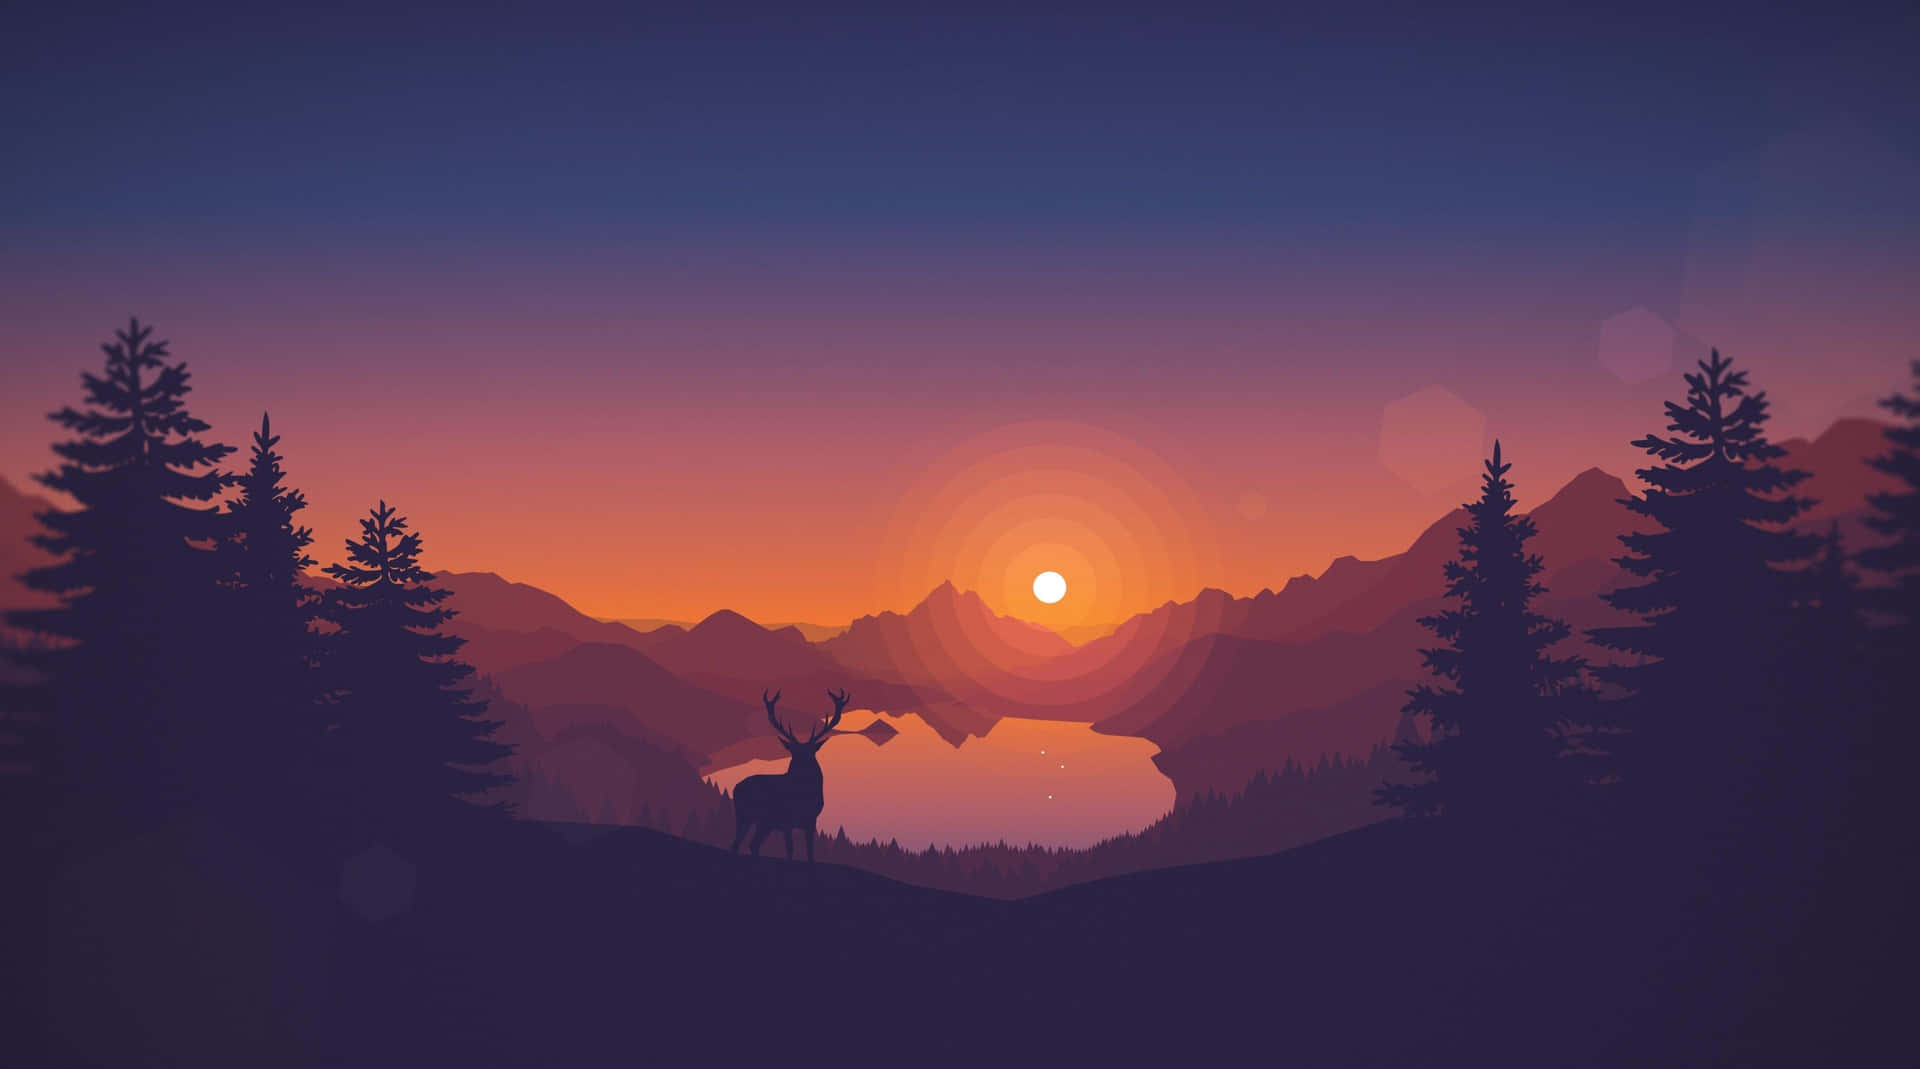 A Deer Silhouetted Against A Sunset In The Mountains